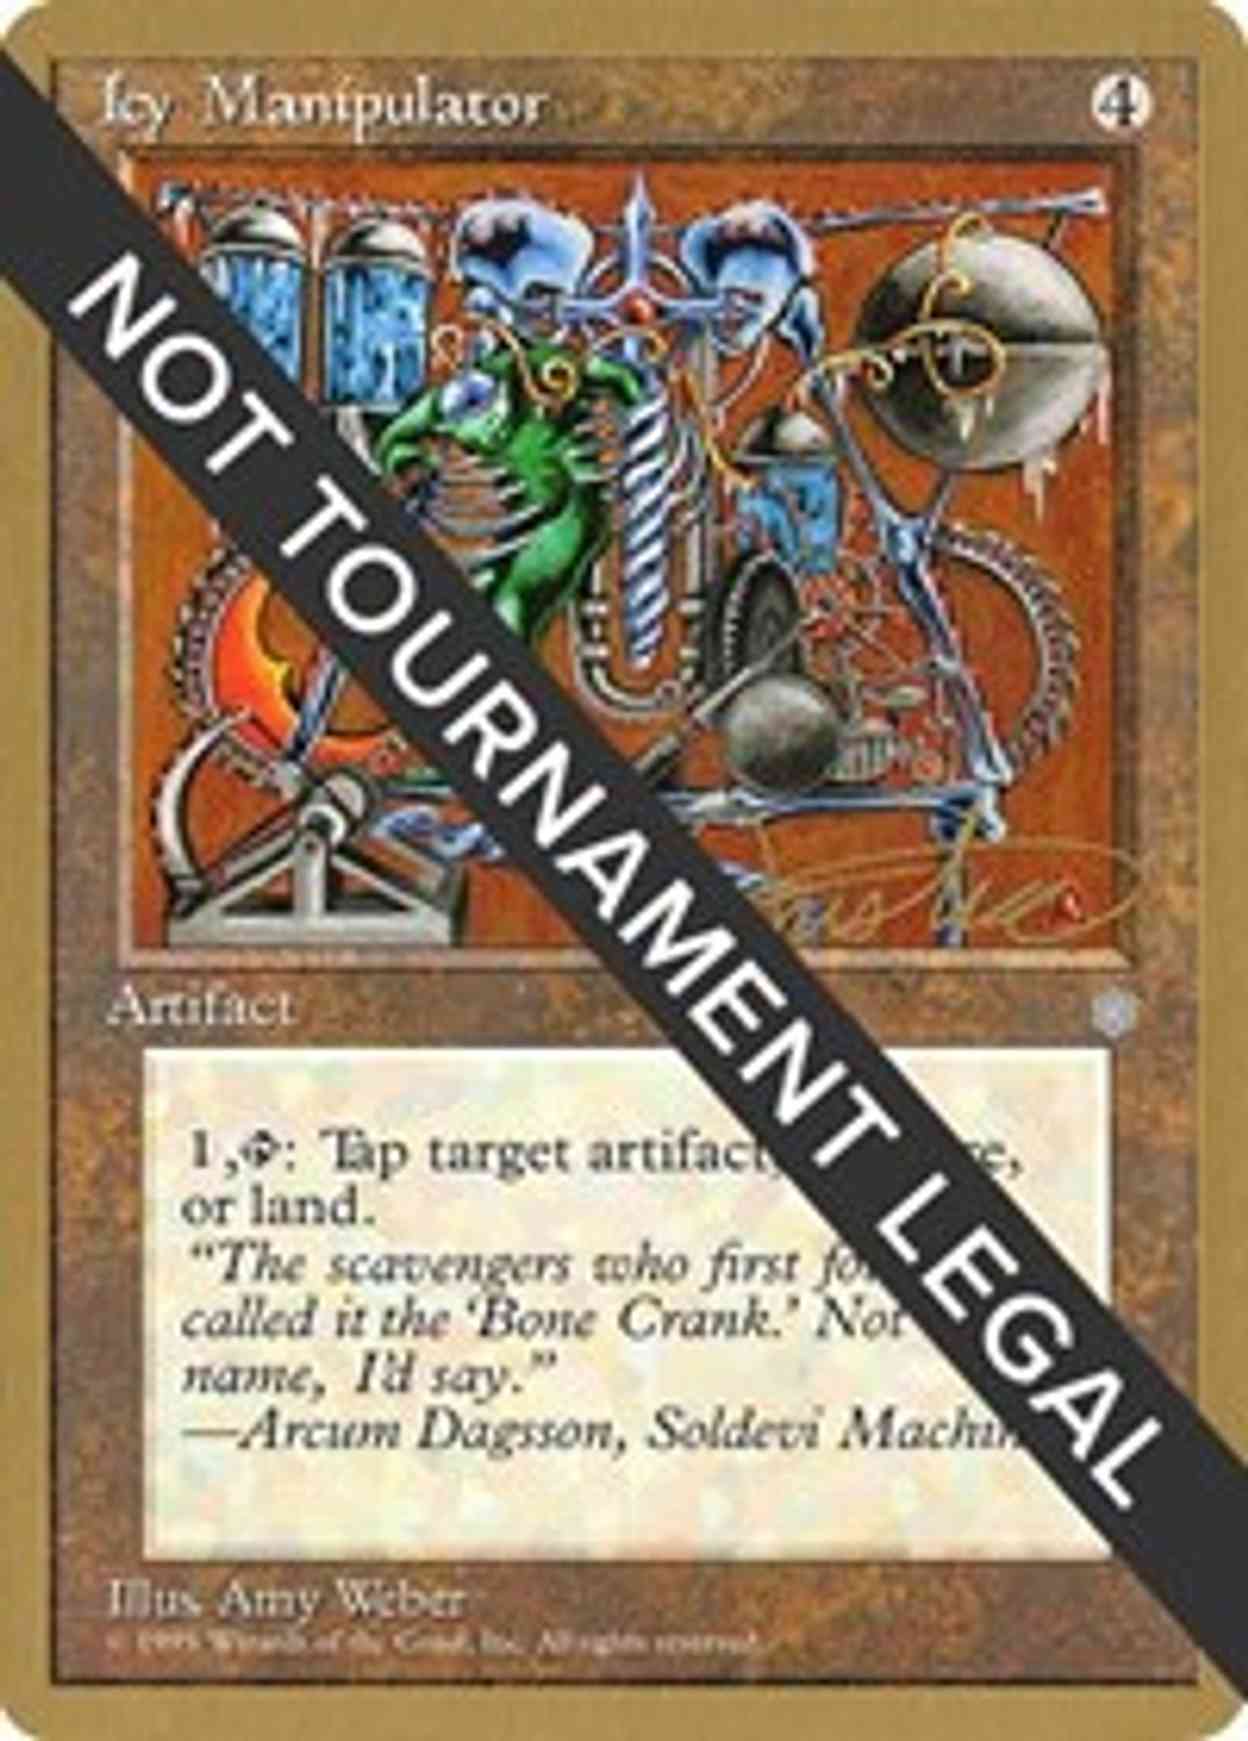 Icy Manipulator - 1996 Mark Justice (ICE) magic card front